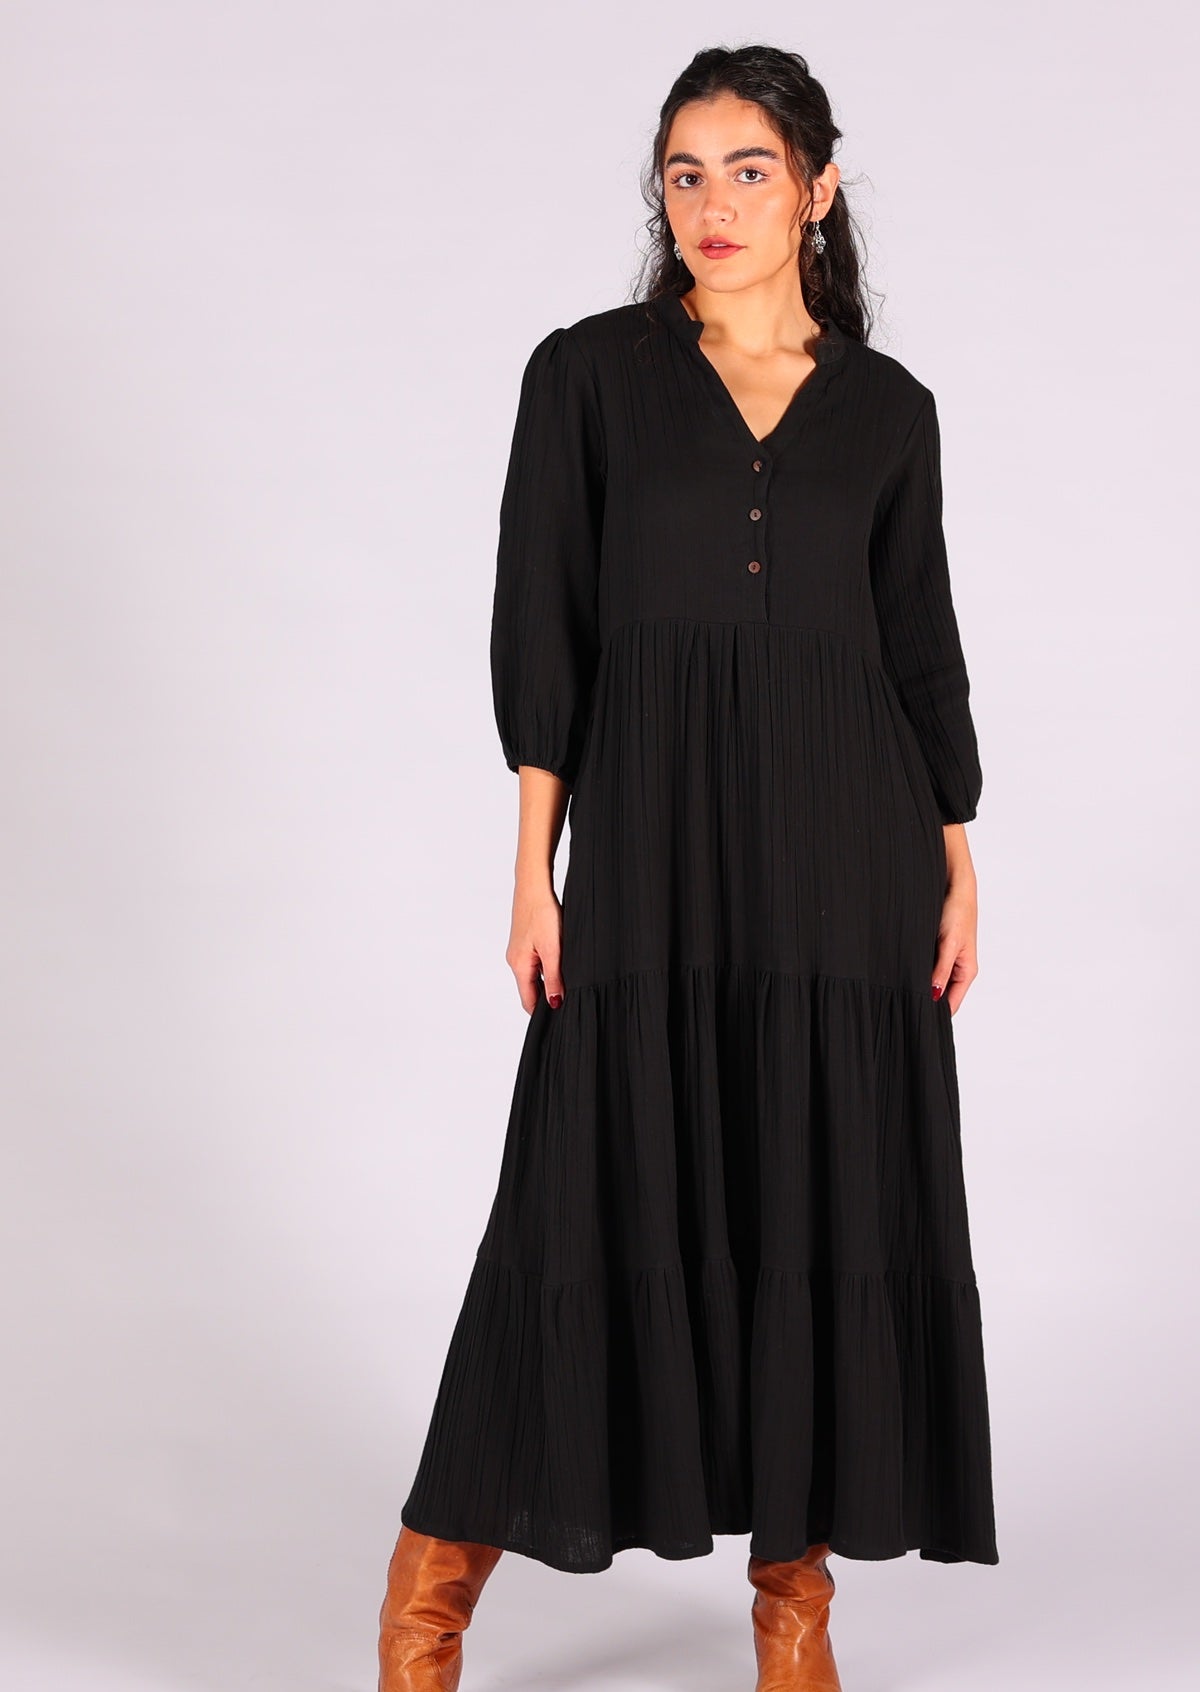 Double cotton maxi dress with tiers and 3/4 sleeves in wardrobe staple black